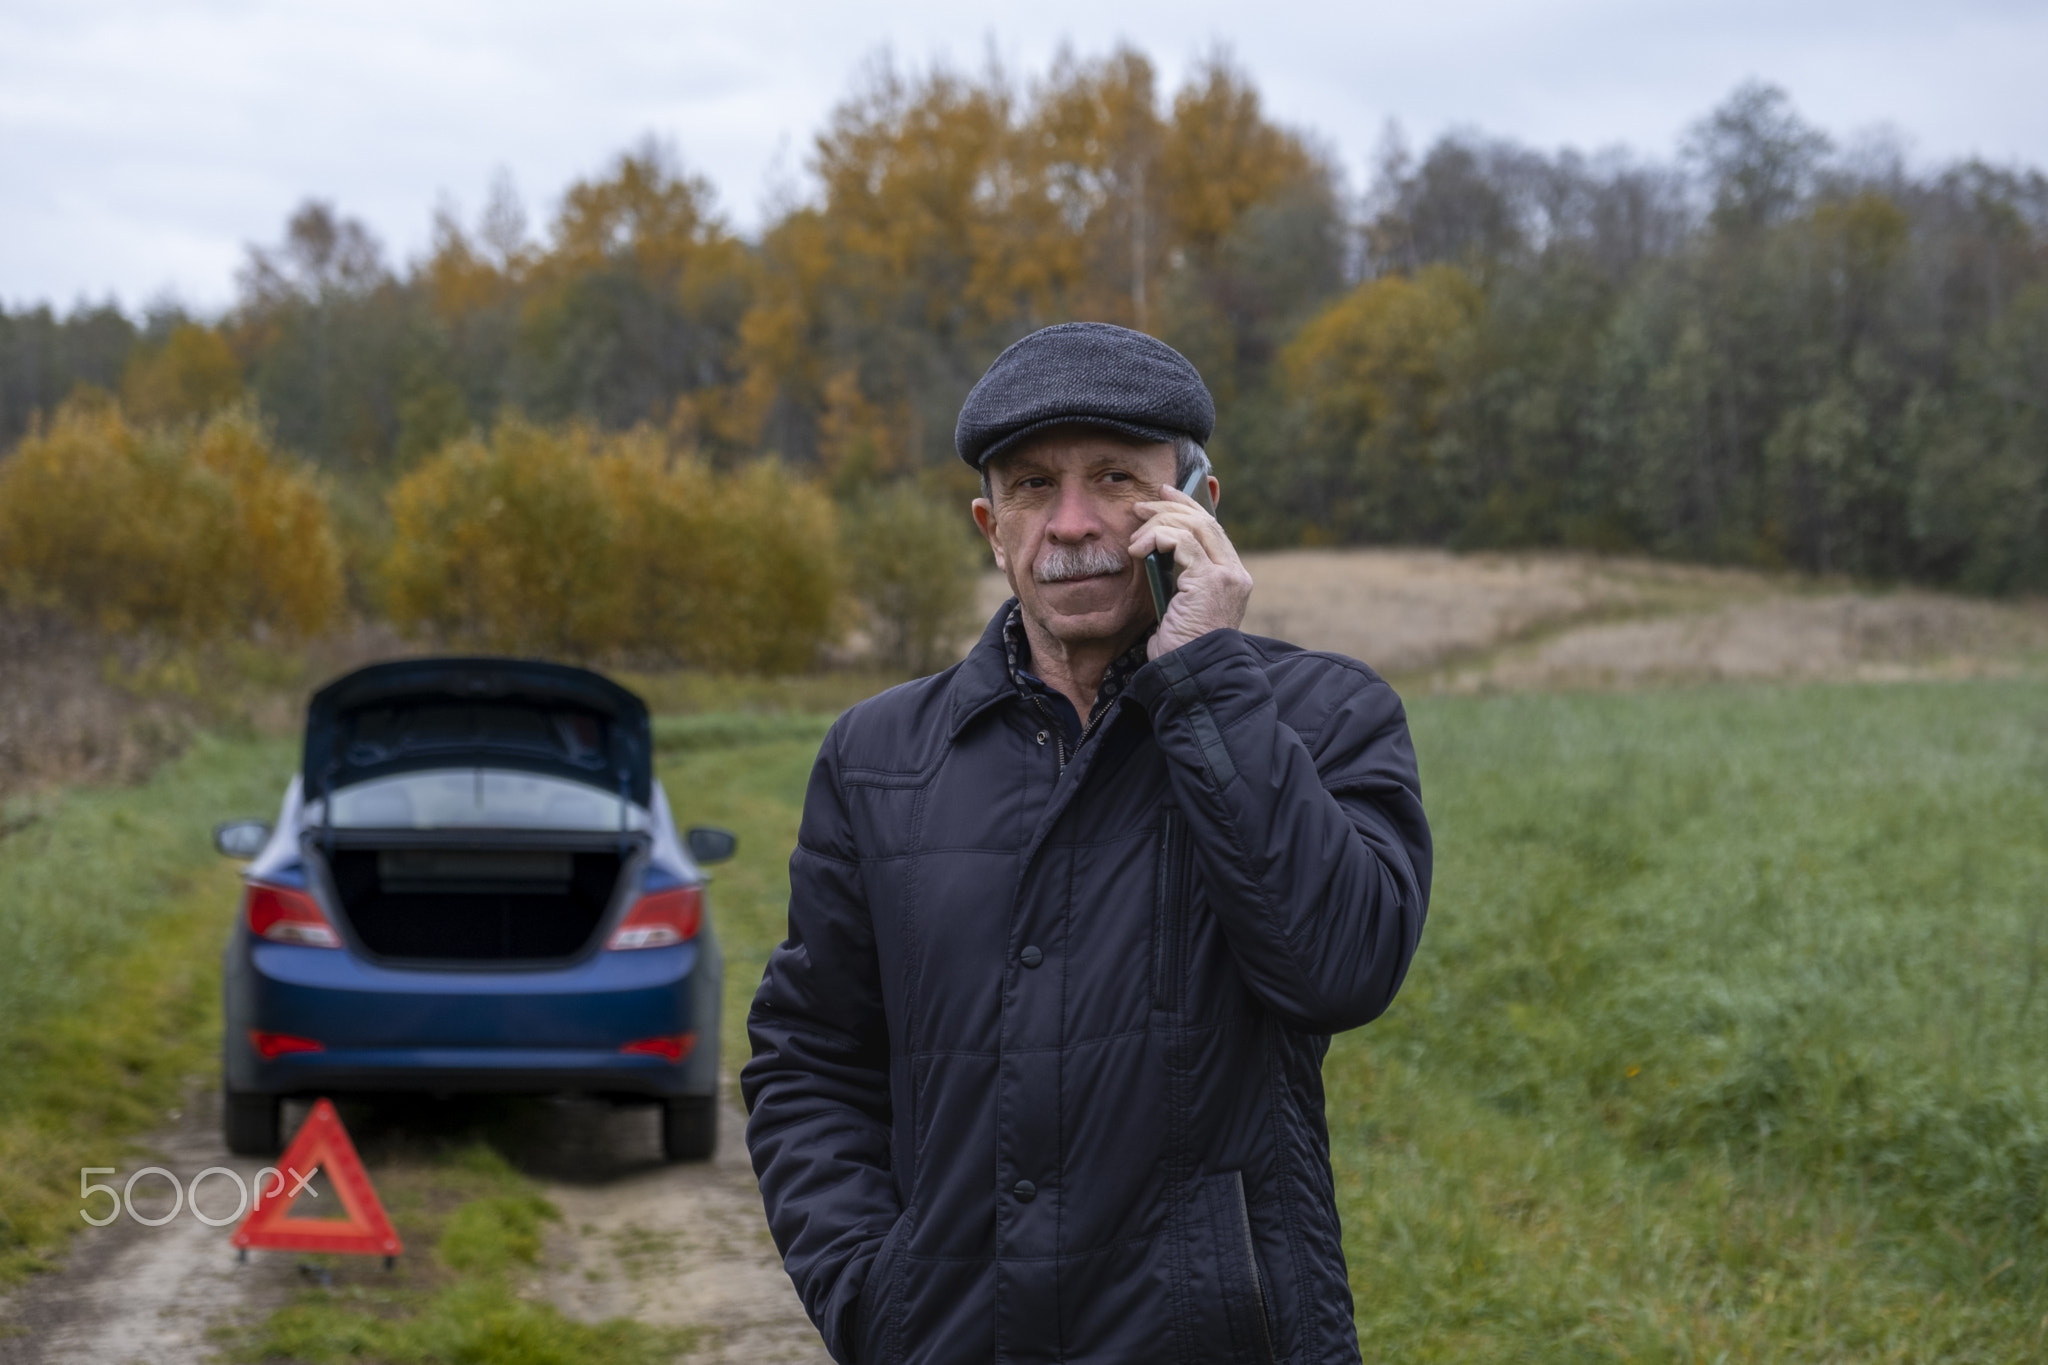 Adult pensioner calls technical assistance on smartphone after his car